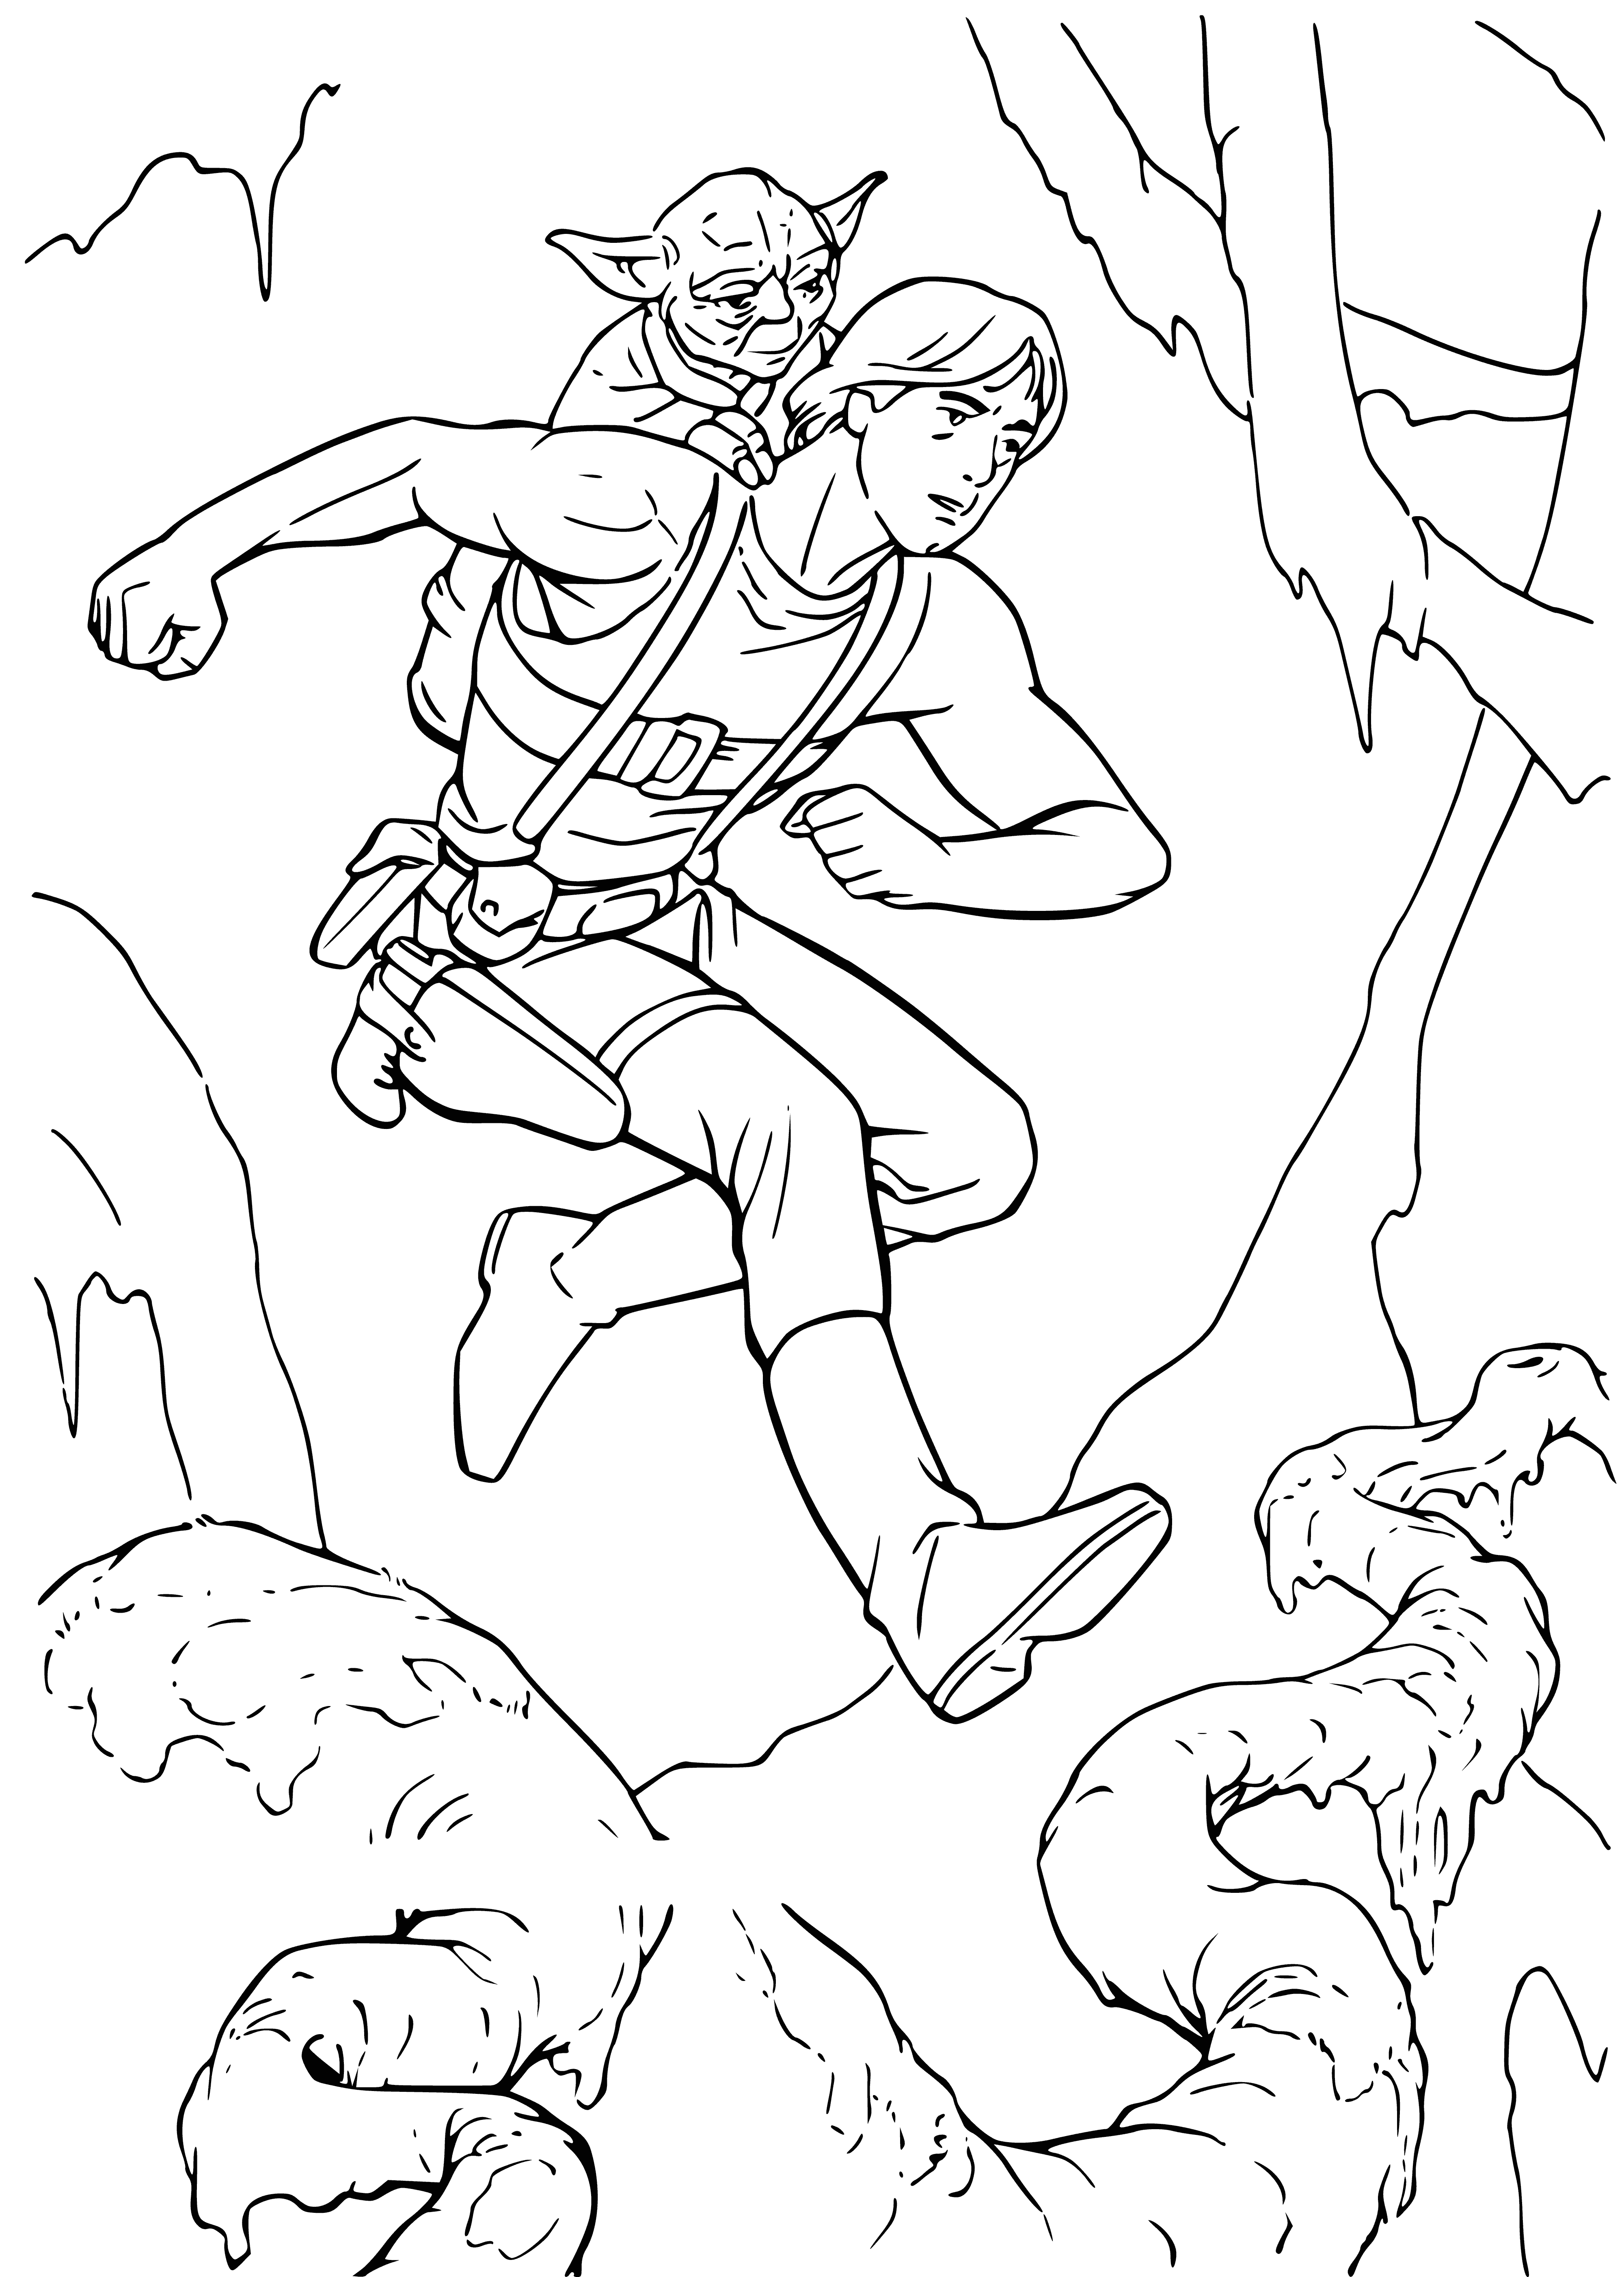 coloring page: Yoda teaches Luke to balance with his lightsaber, while Luke defends himself with blaster bolts. #StarWars #Jedi #Force